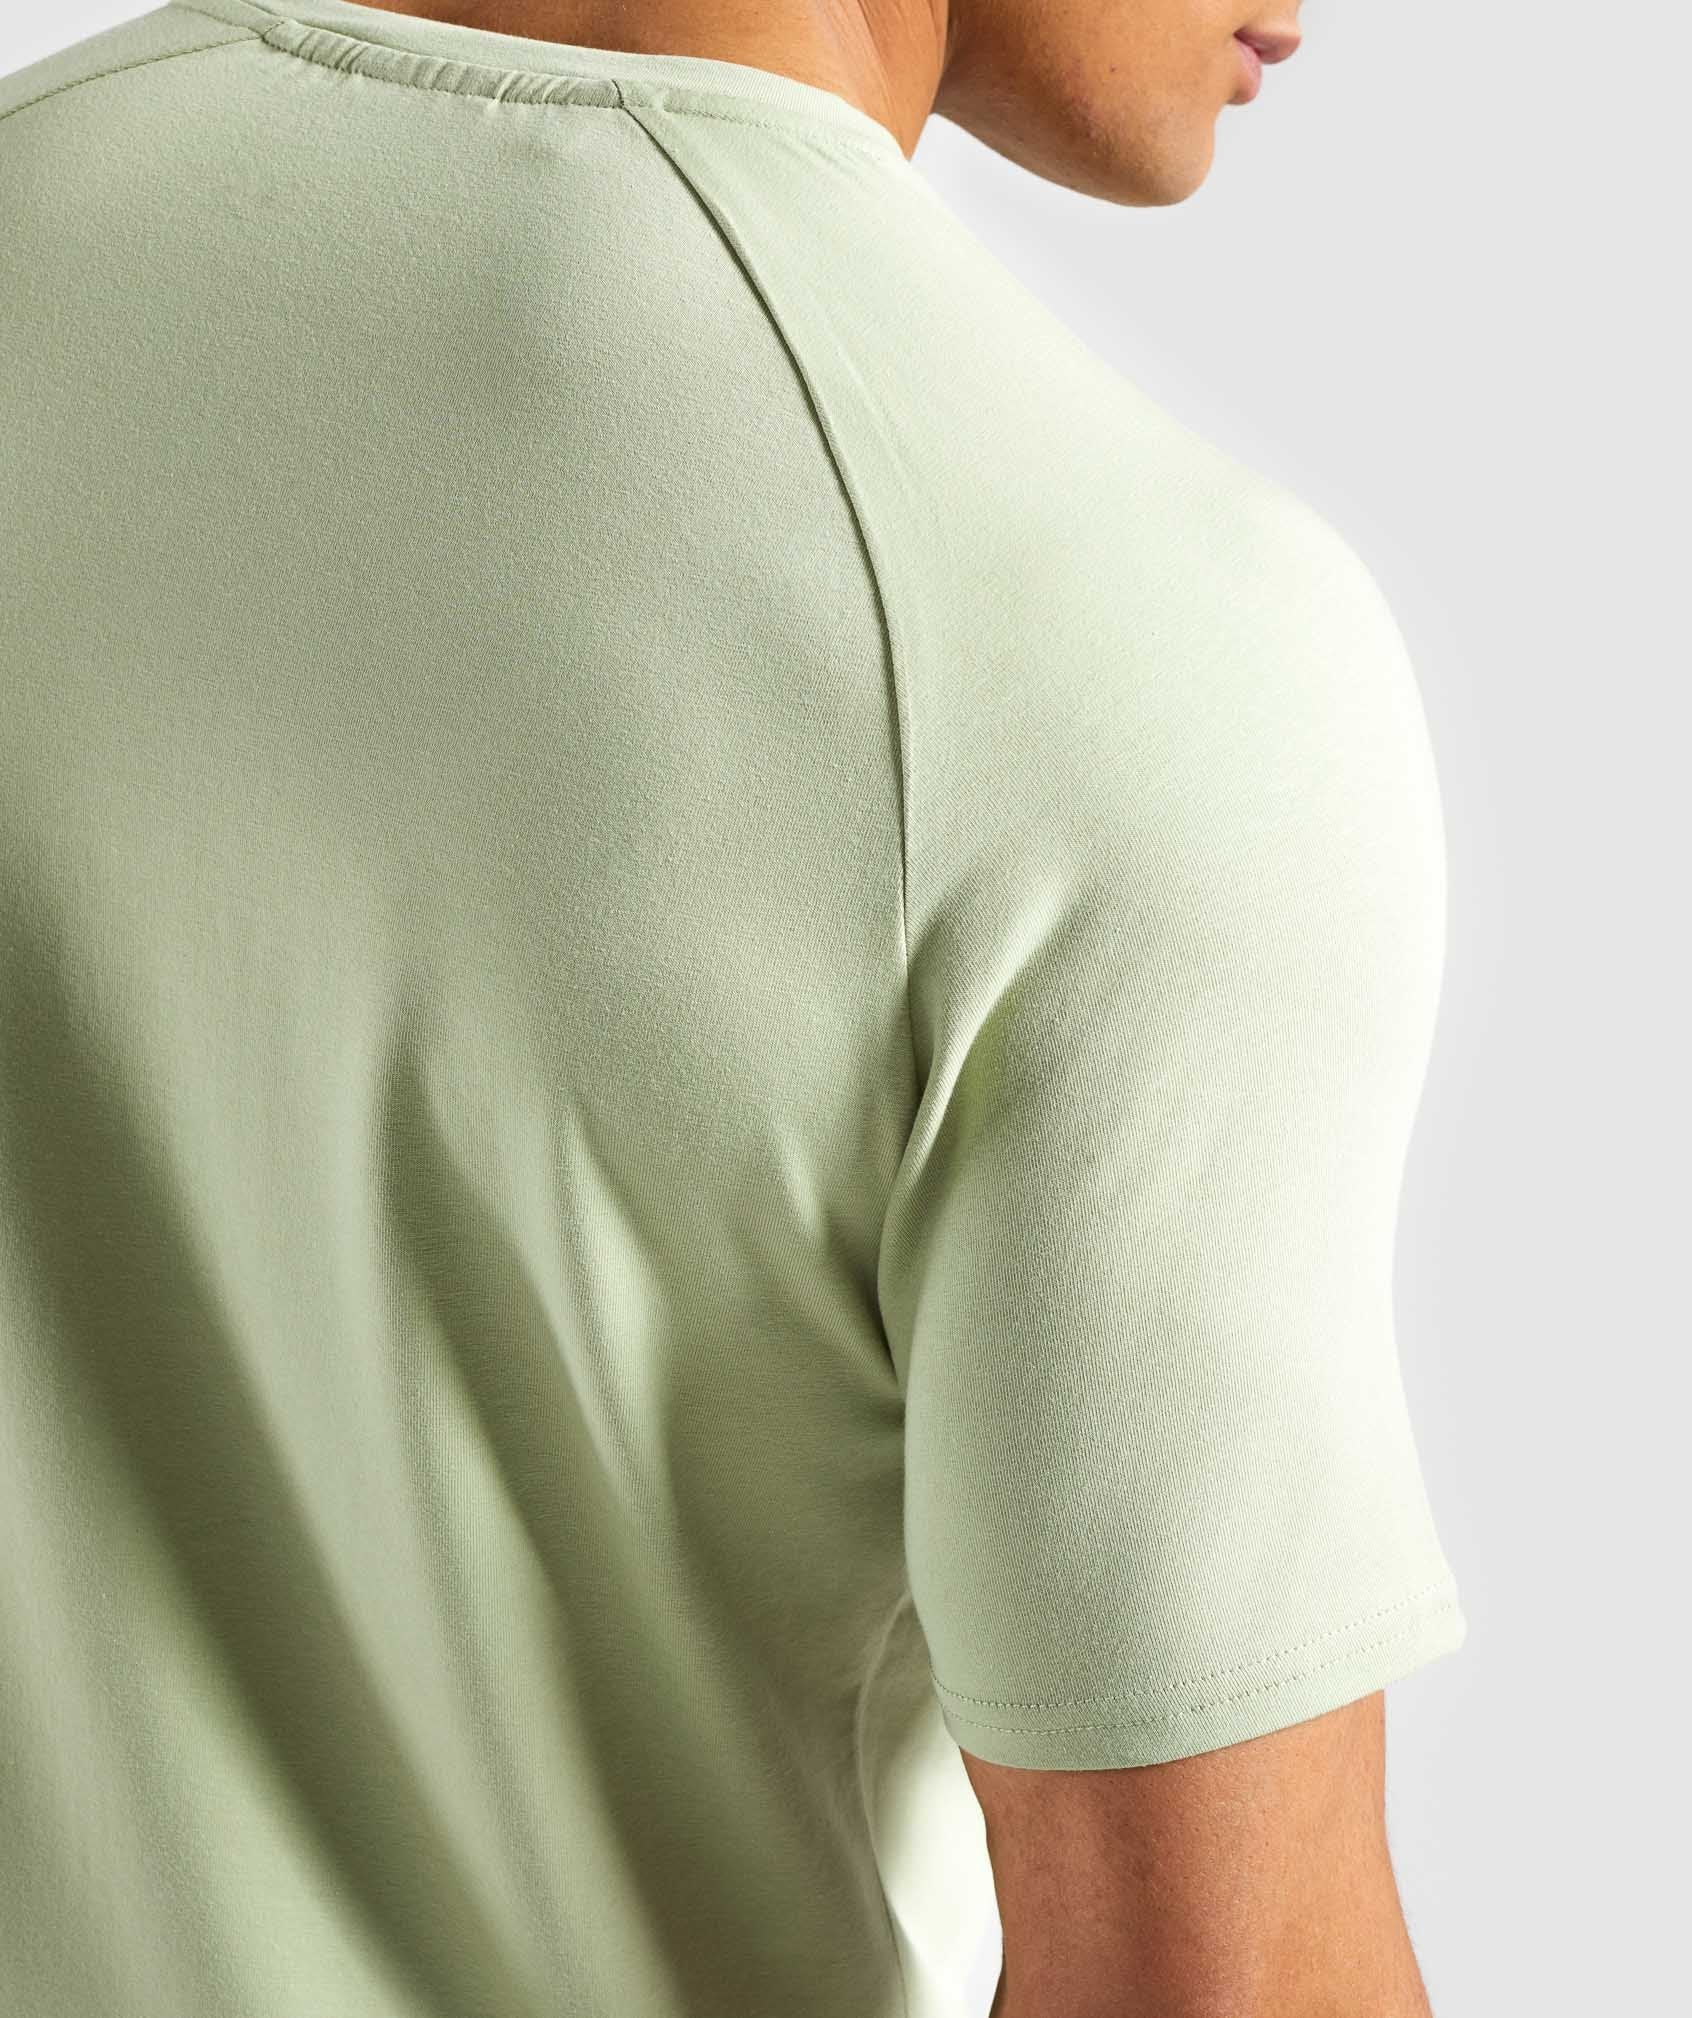 Apollo T-Shirt in Green - view 6